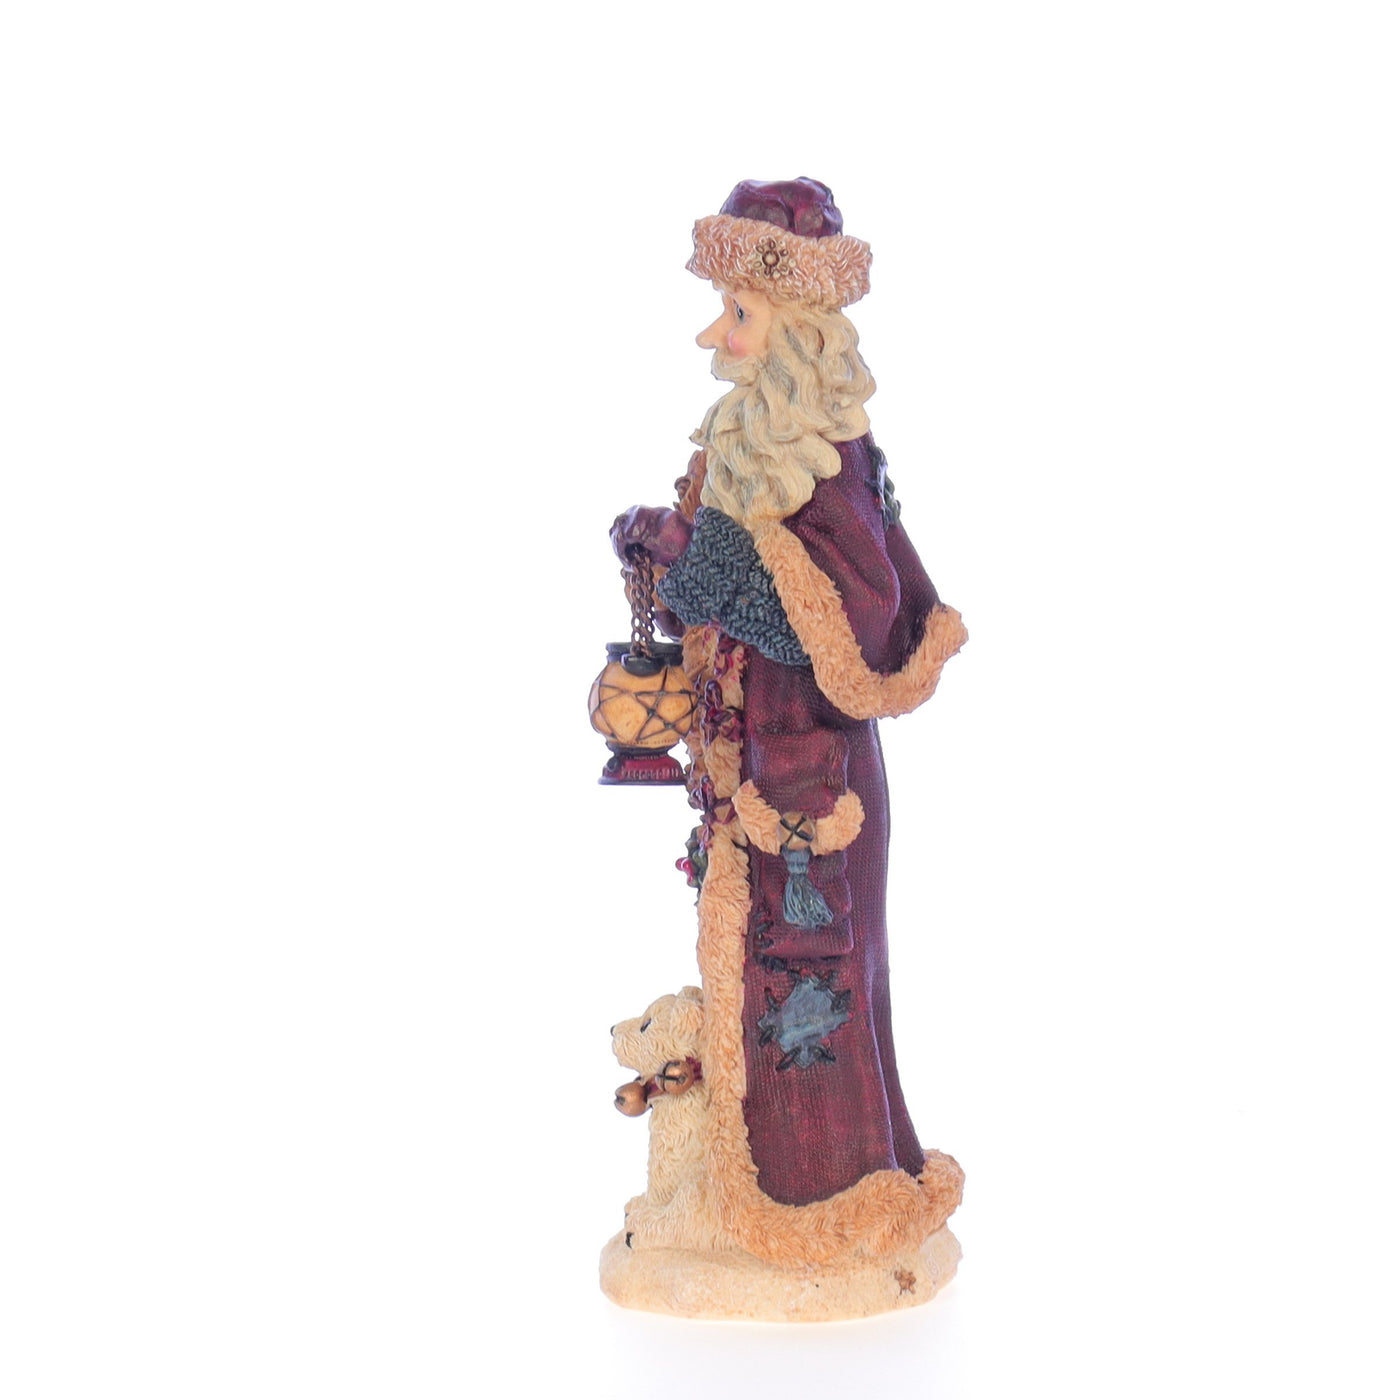 Boyds_Bears_Folkstone_Resin_Figurine_St_Nick_The_Quest_2808_03